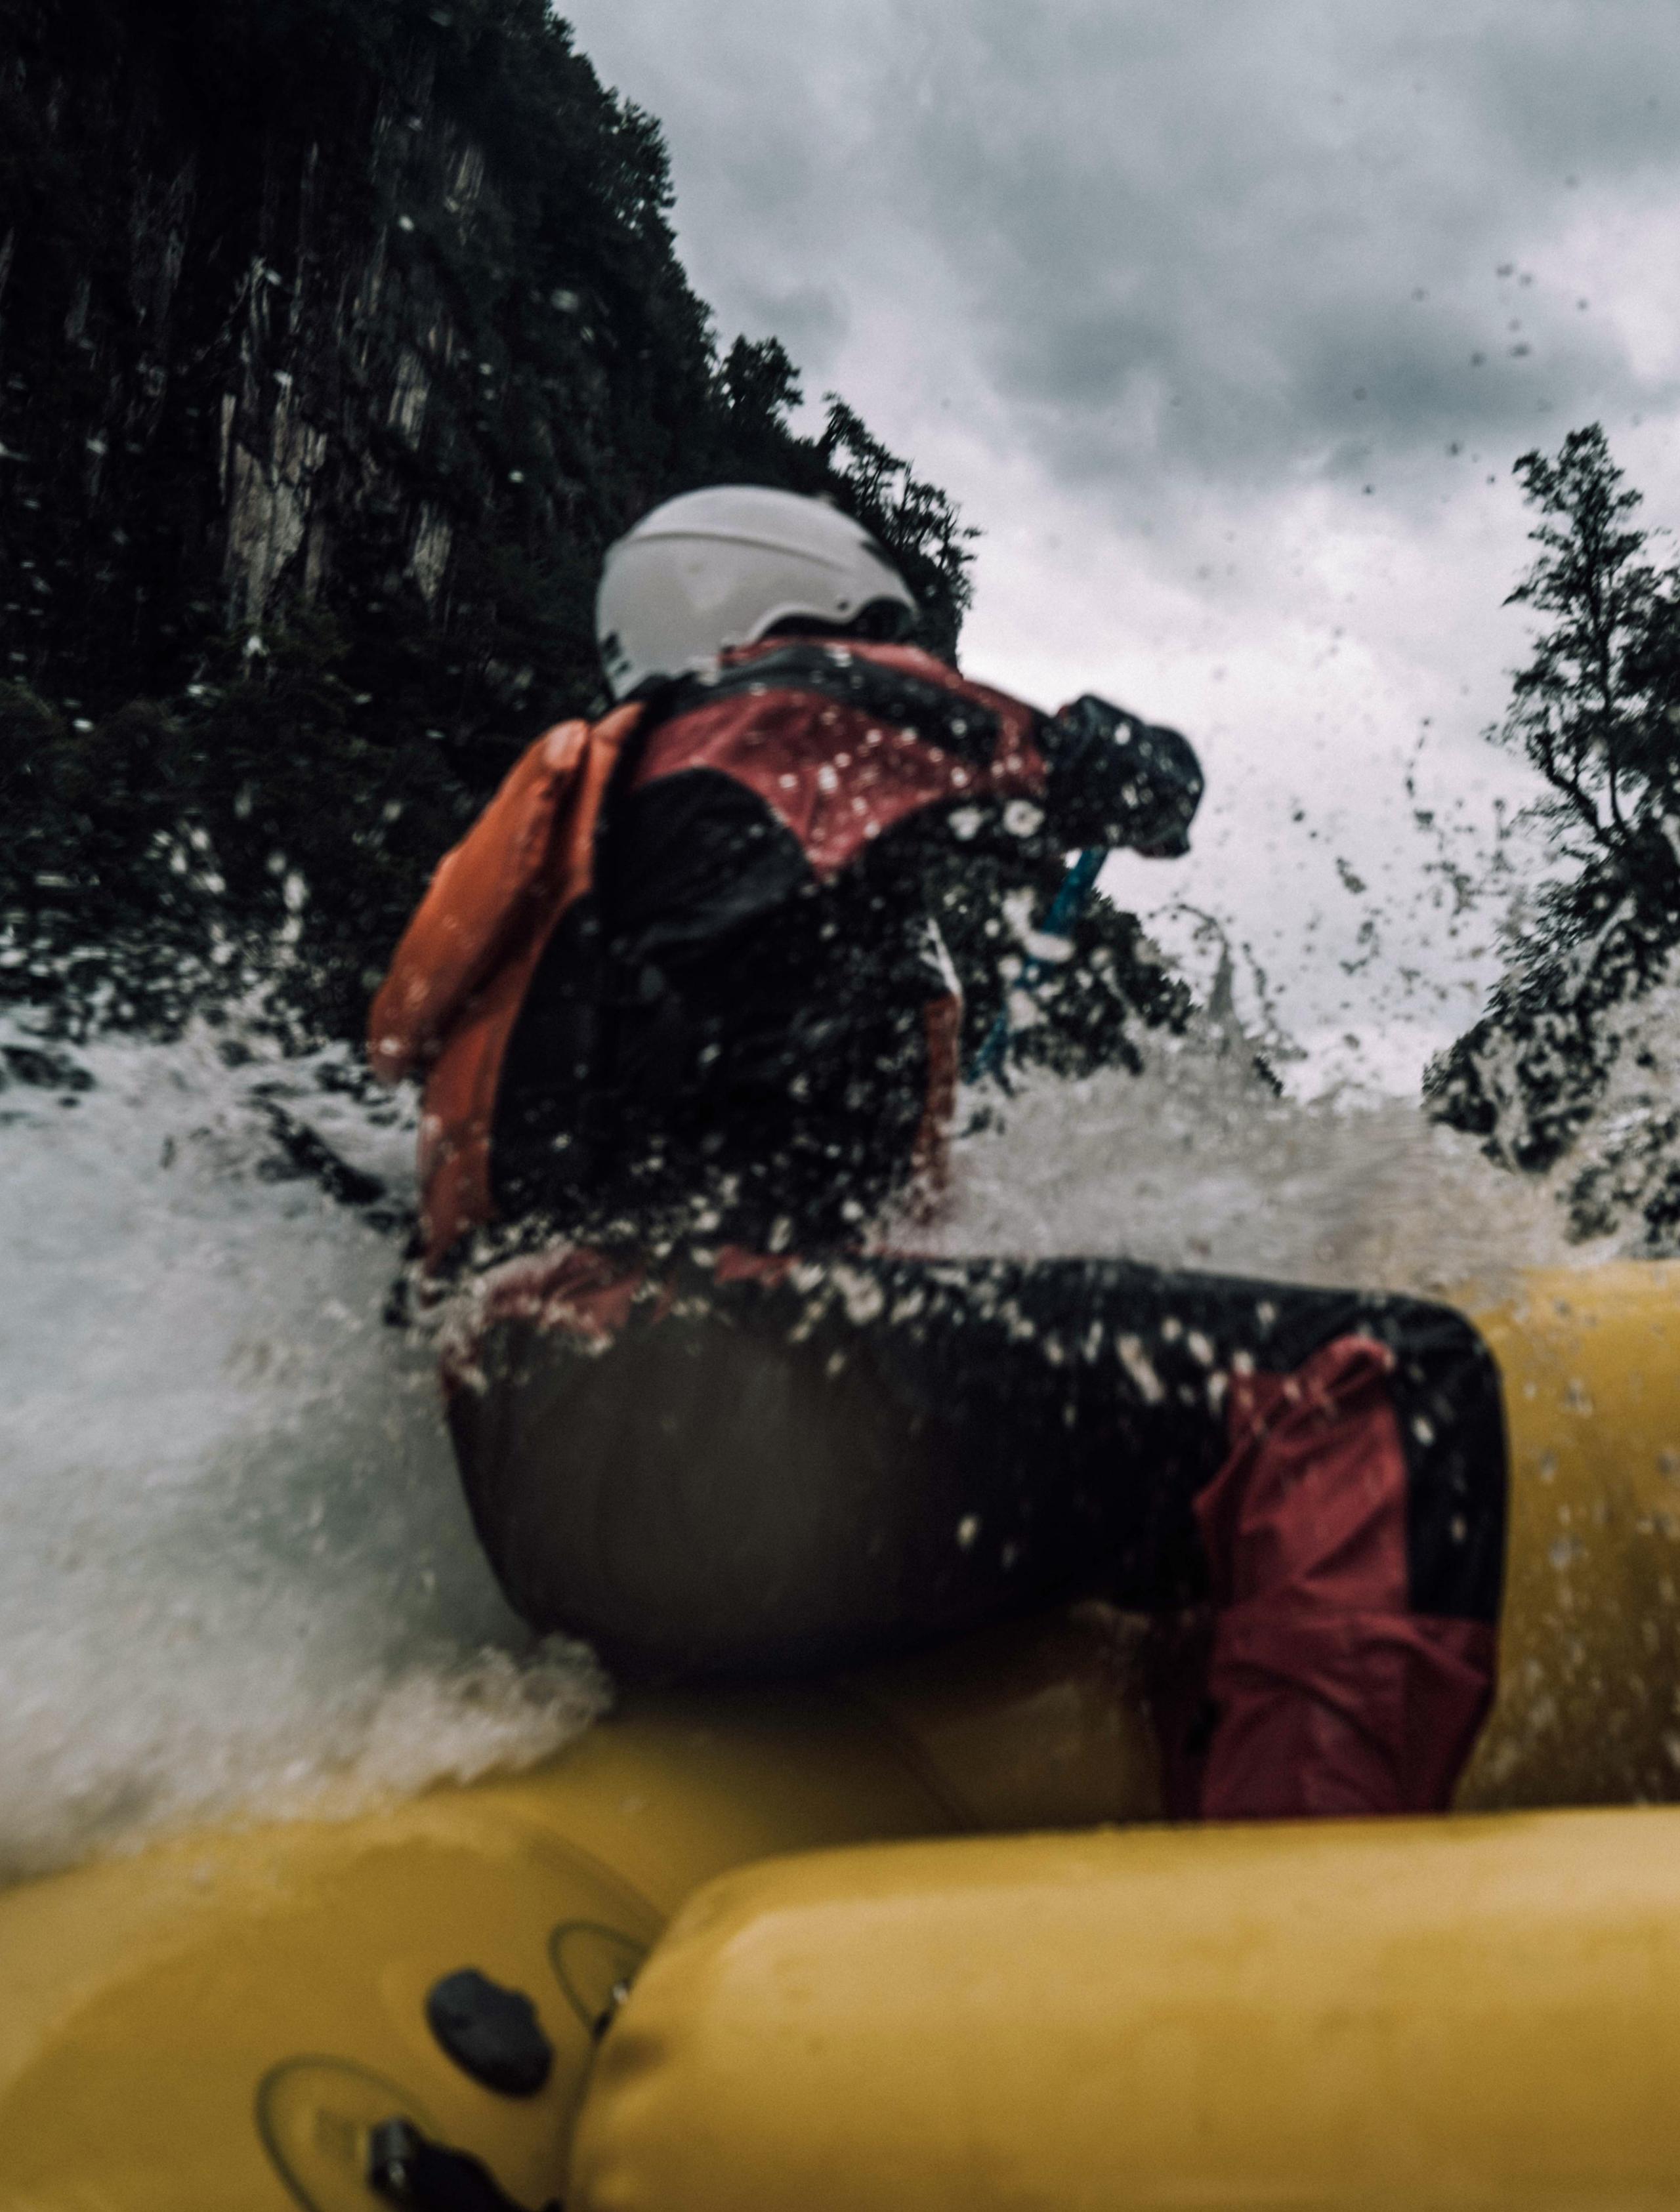 POV of people whitewater rafting with water spraying